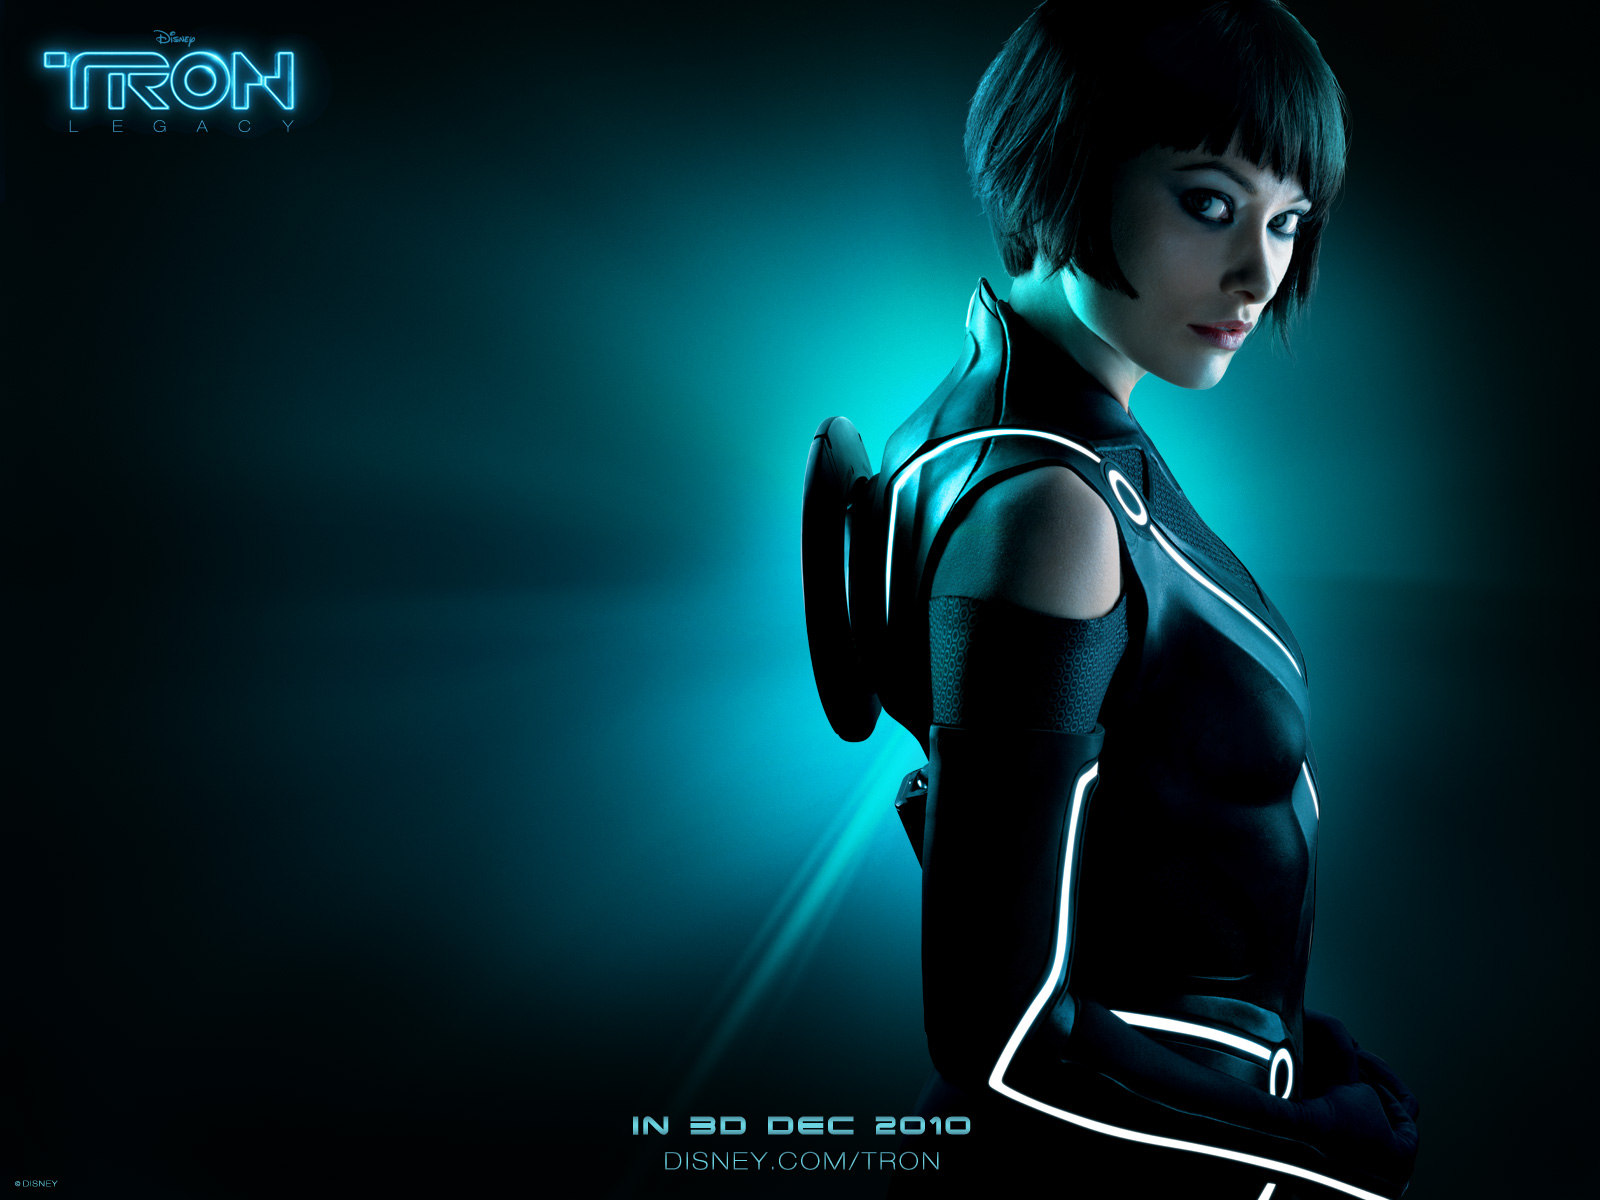 Tron Legacy Characters HD Wallpaper Posters Download Free Wallpapers ...